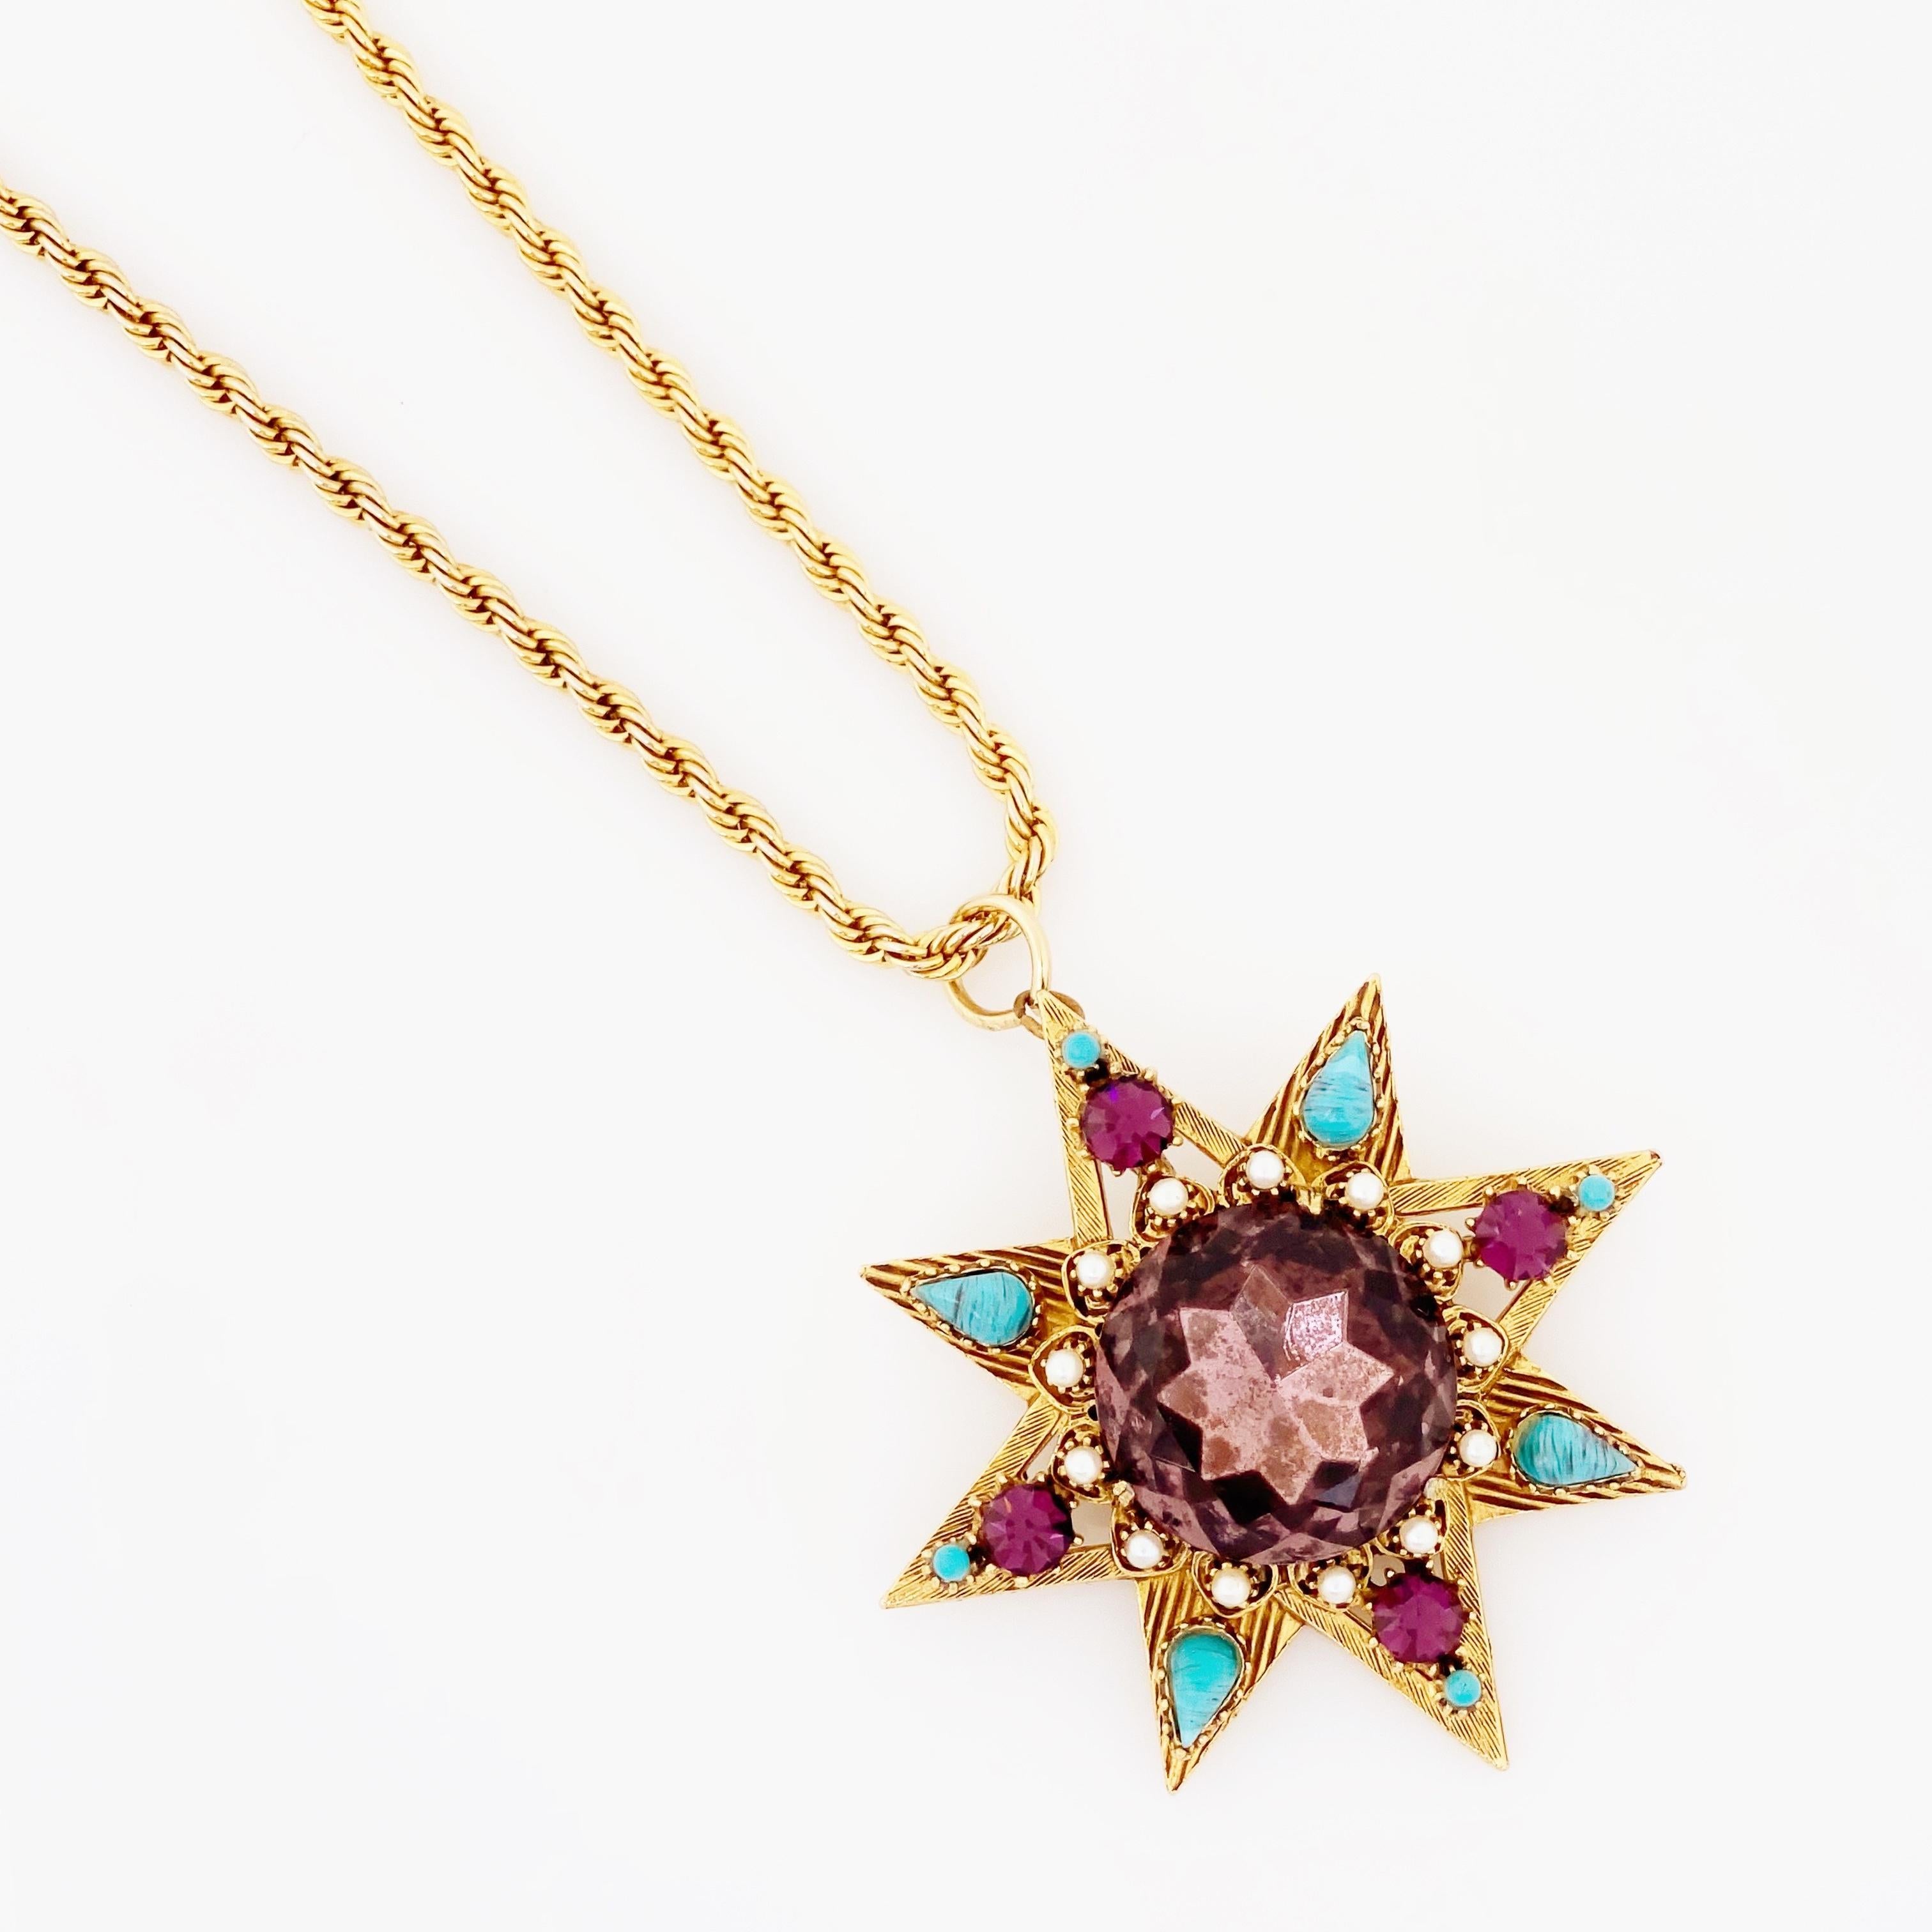 Women's Star Pendant Necklace With Amethyst Crystal and Turquoise By Florenza, 1960s